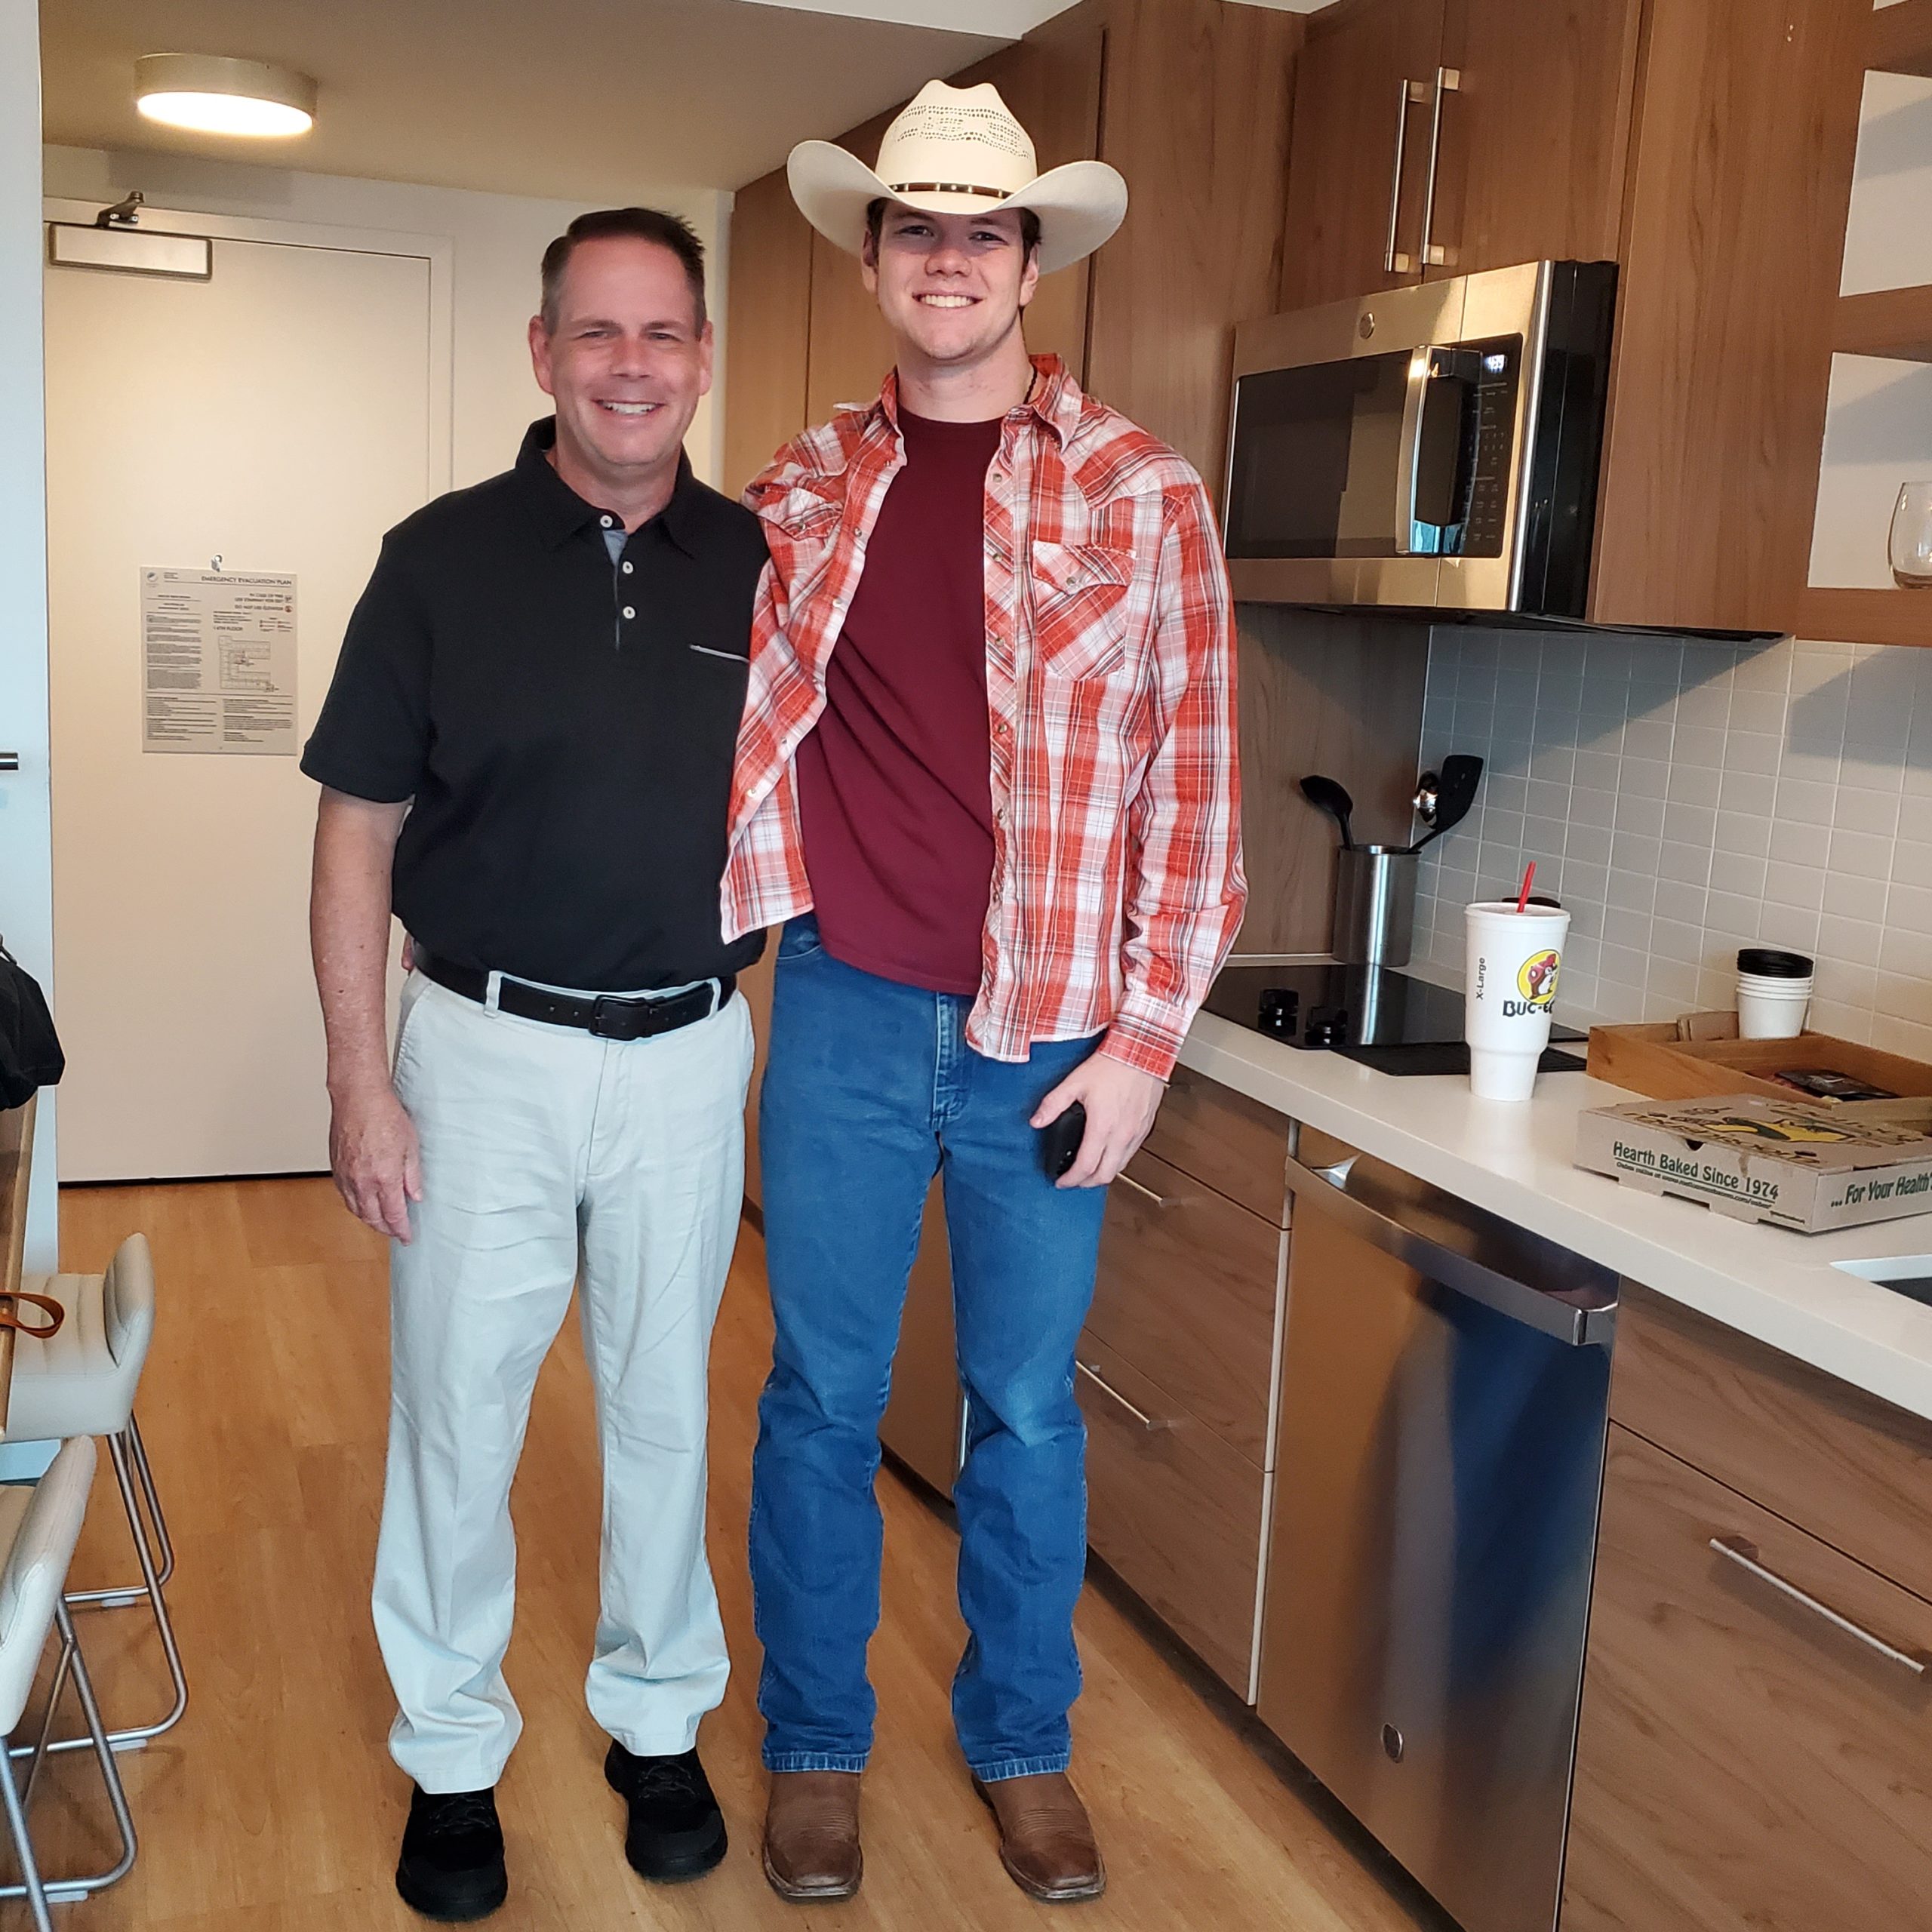 Father and son on their way to a music concert in Atlanta, Georgia to see Luke Combs.